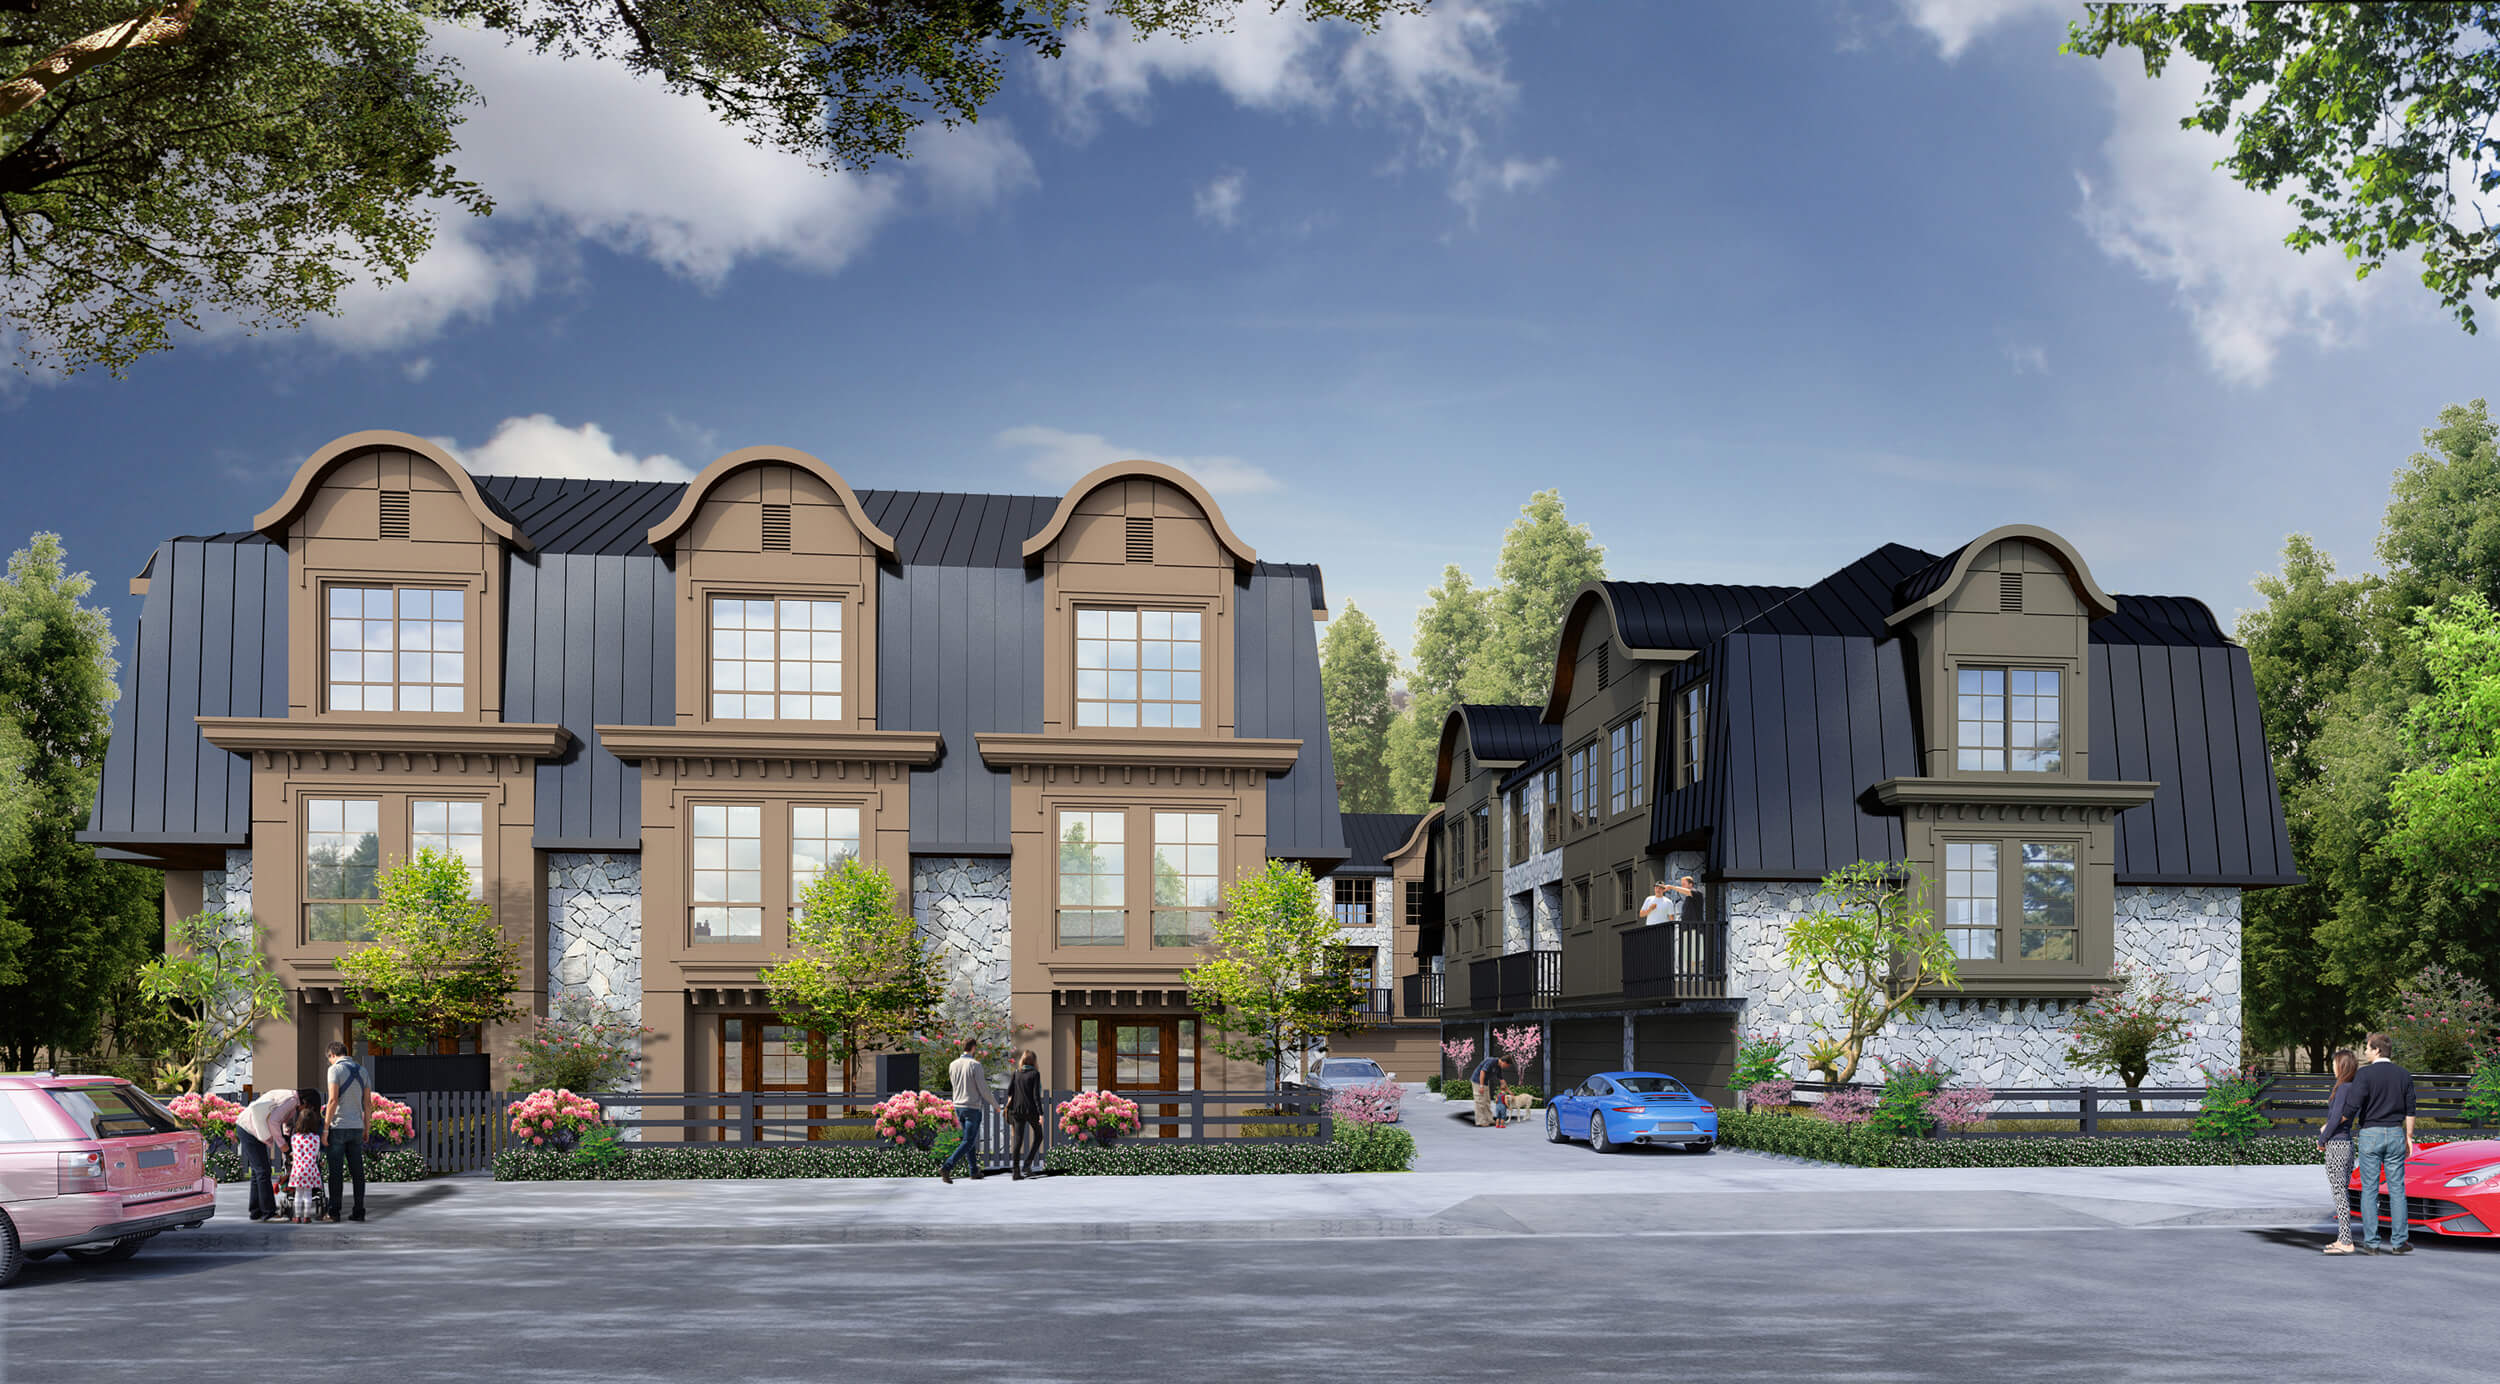 “172 Avenue” development is a residential Multi-Family project in Surrey. Design by Group 161 | DF Architecture.